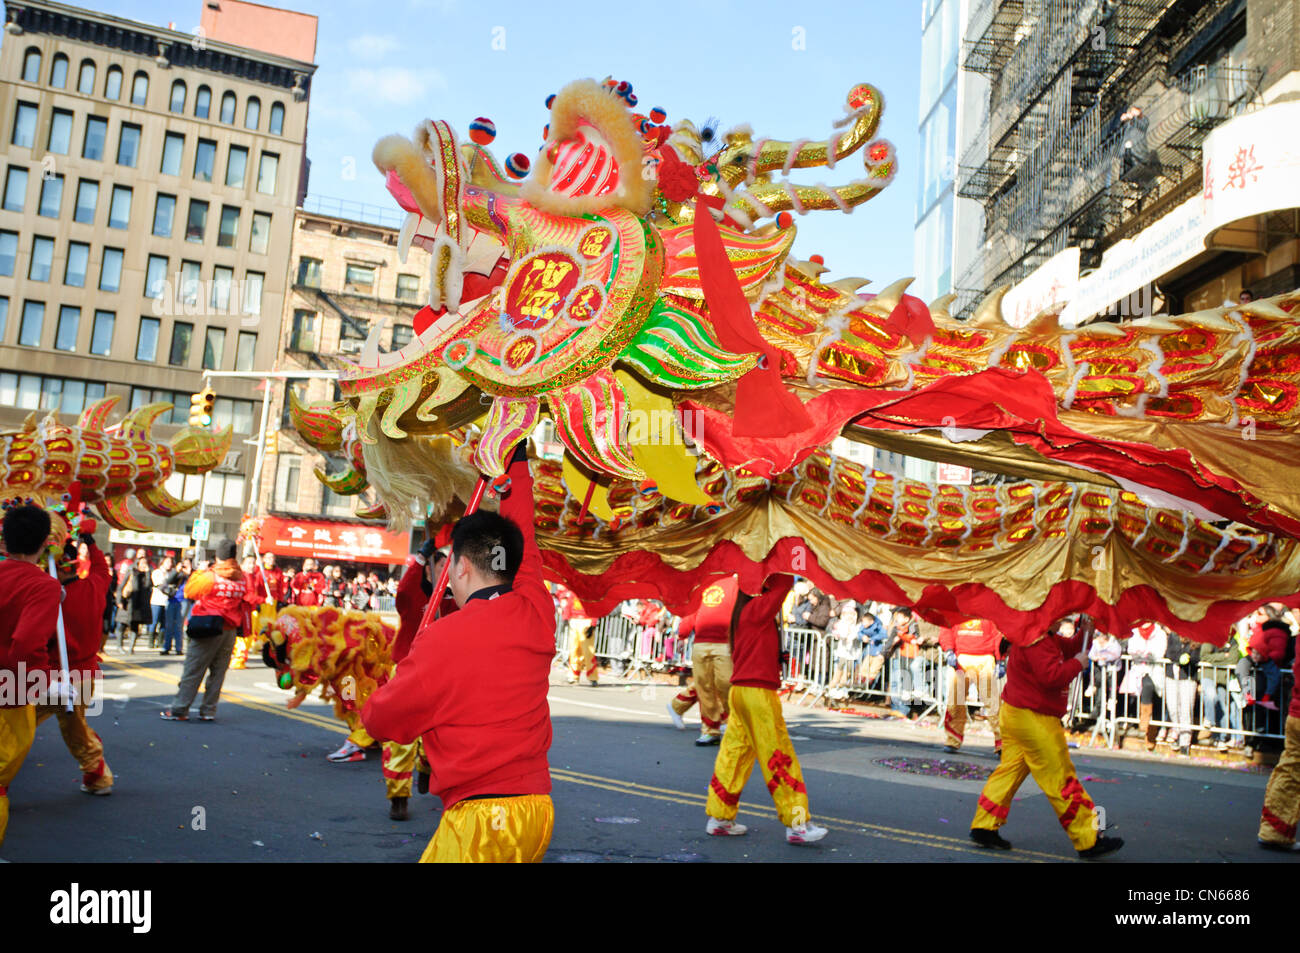 A dragon in the Chinese New Year Parade, NYC, Feb. 6, 2011. Stock Photo